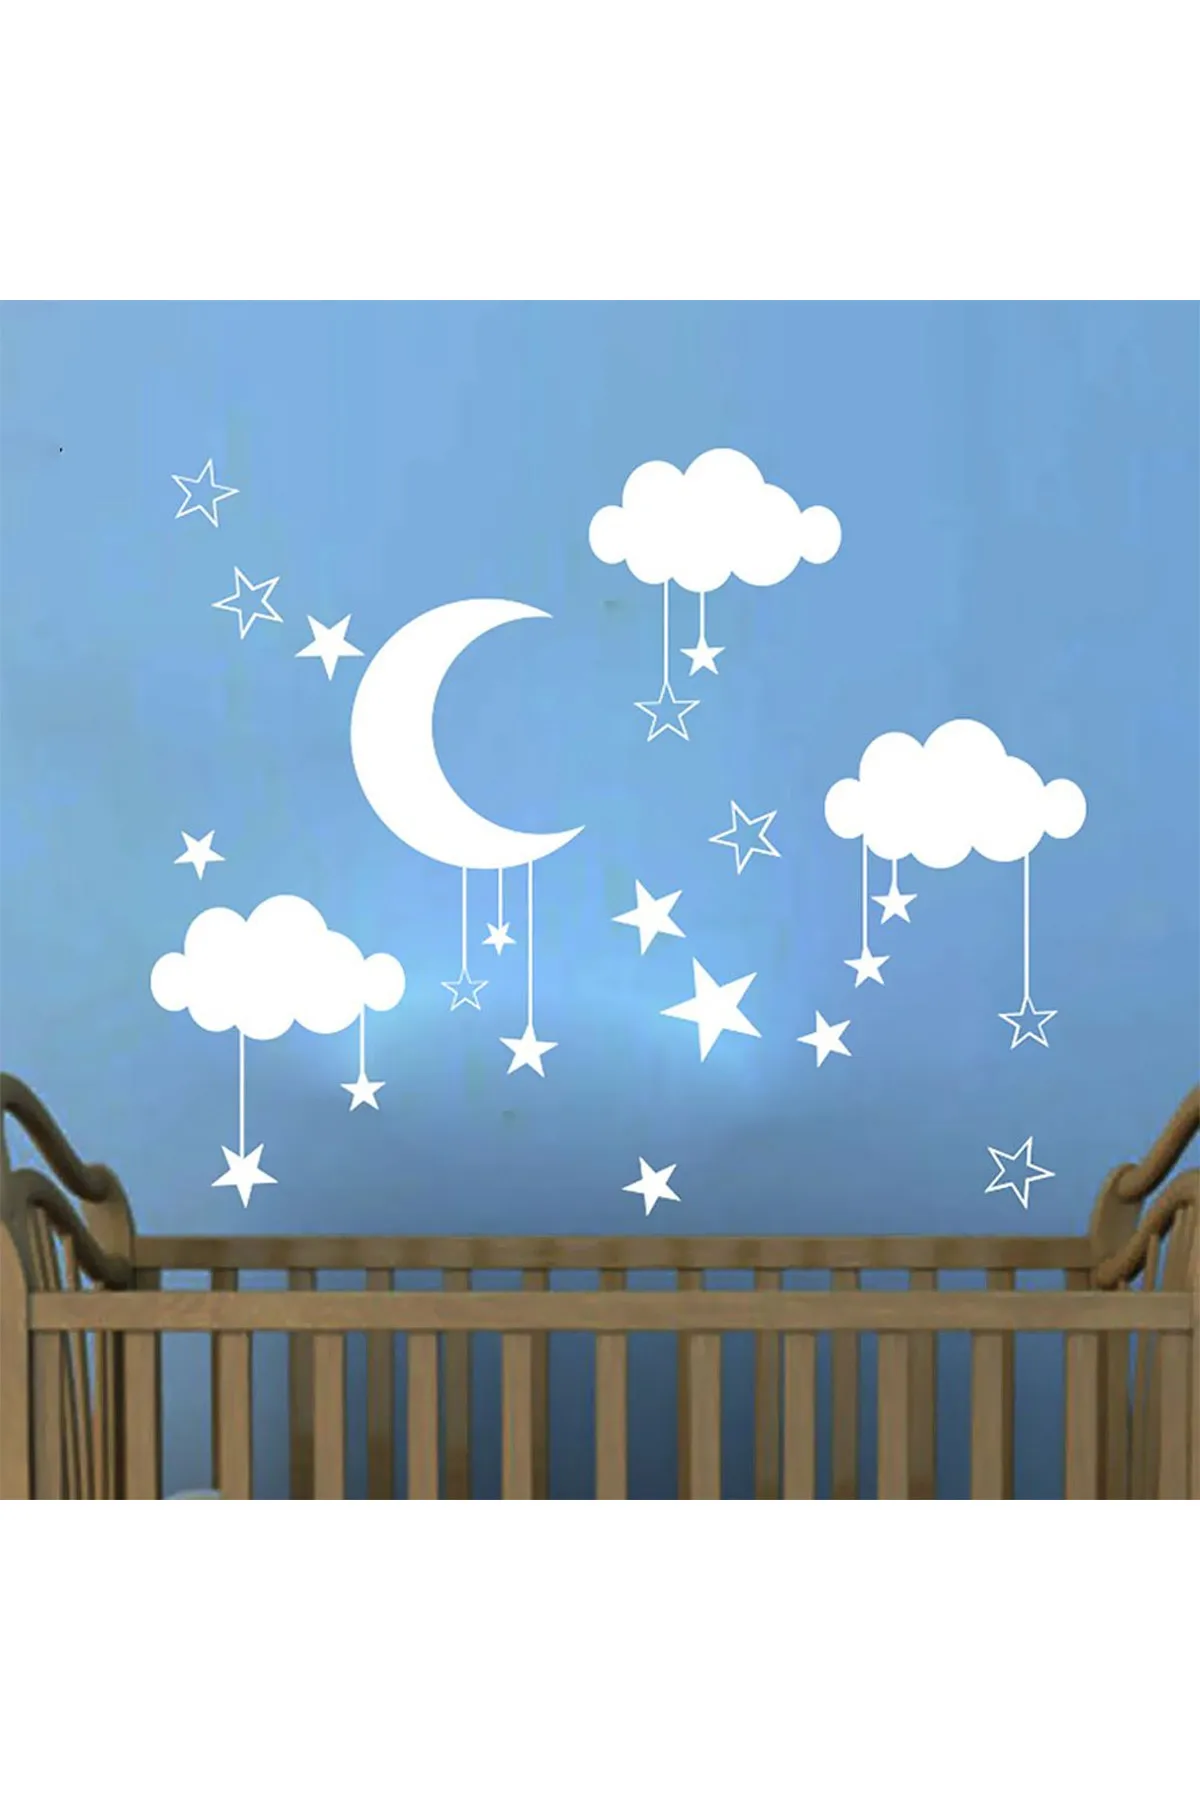 

Moon Stars Clouds Baby & Kids Room Adhesive Nursery Pvc Home Decor Self Adhesive Wall Paper Foil 2021 Landscape Trend